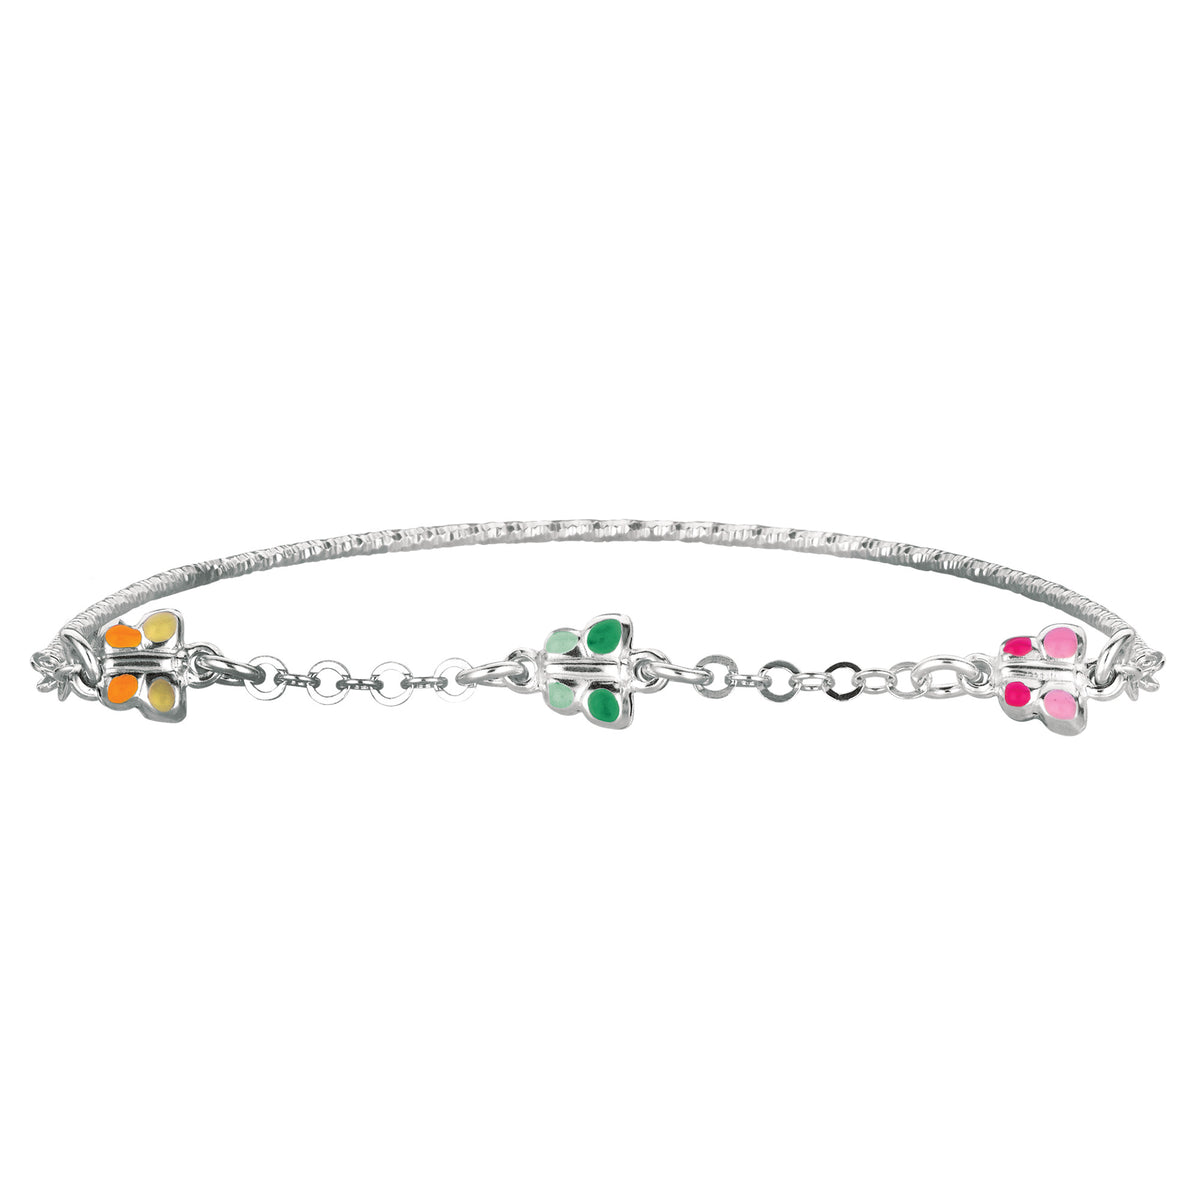 Baby Bangle Bracelet With Butterfly Enameled Charms In Sterling Silver - 5.5 Inch - JewelryAffairs
 - 1